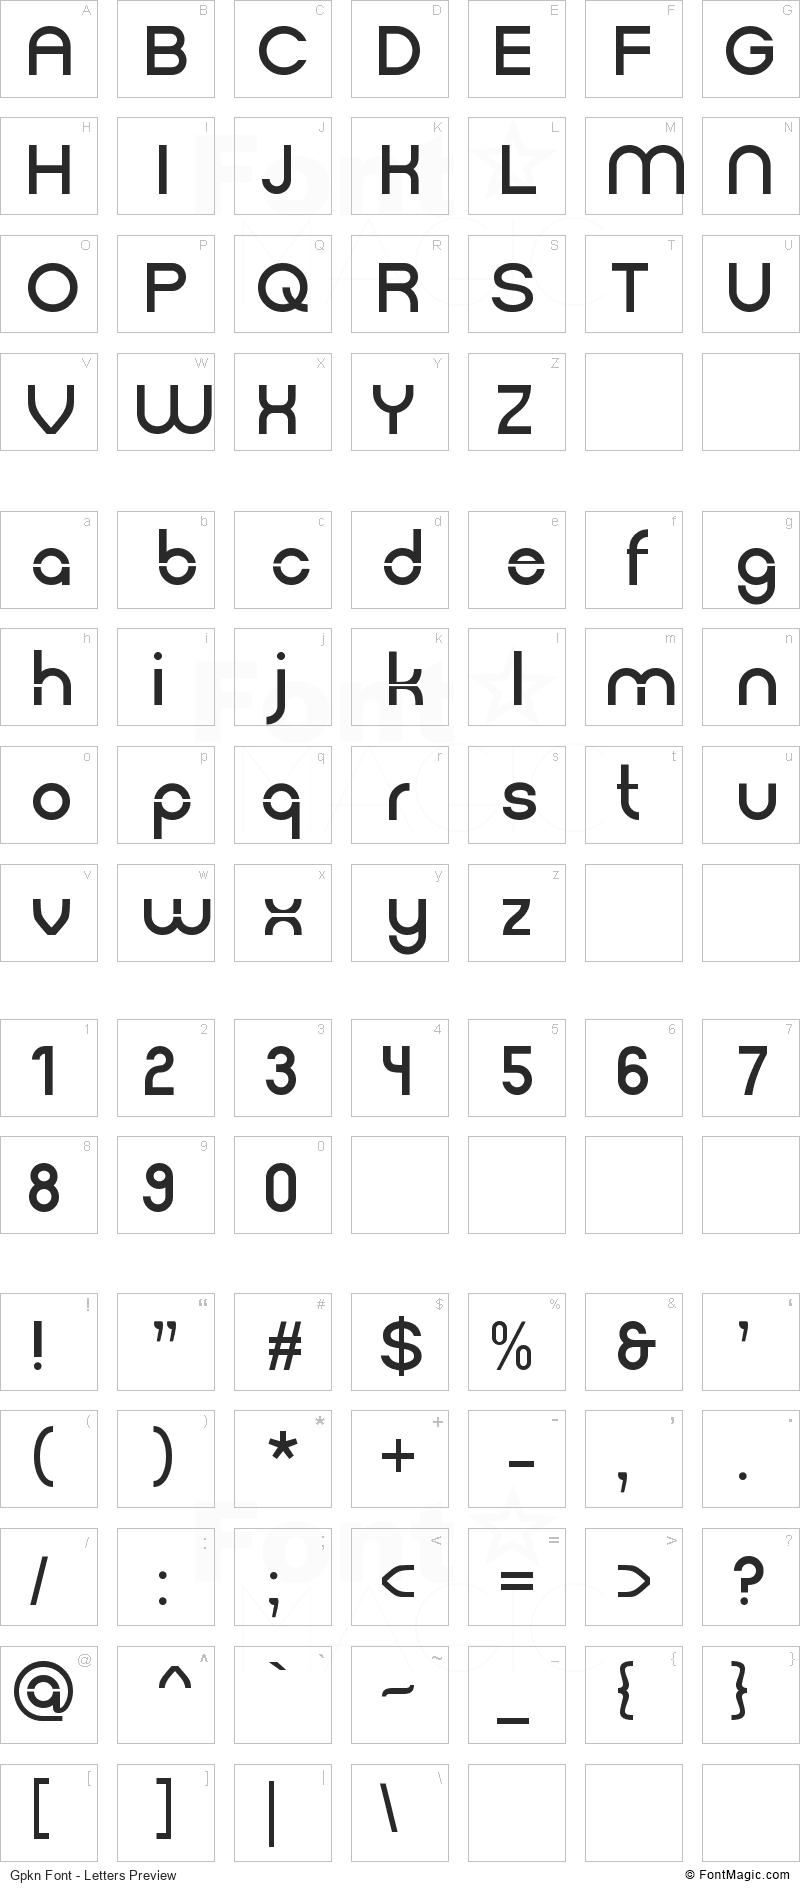 Gpkn Font - All Latters Preview Chart